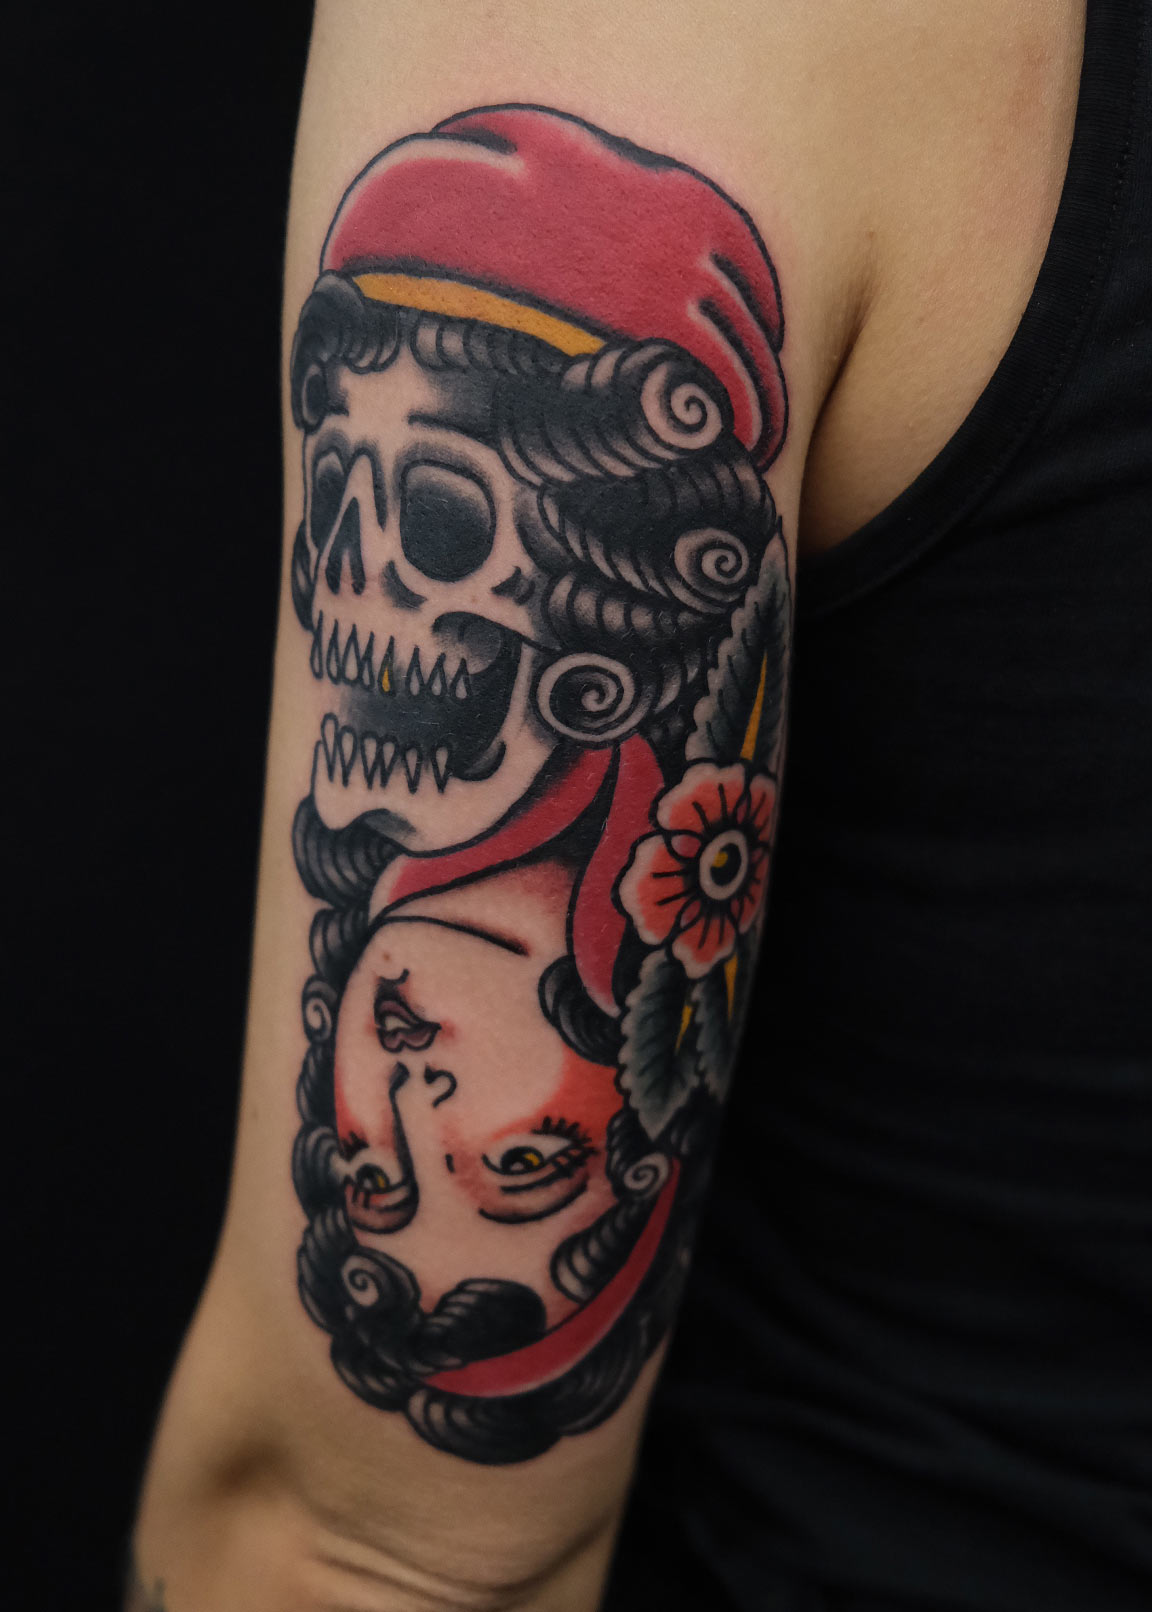 traditional lady head and skull by Swen Losinsky at good old times tattoo berlin